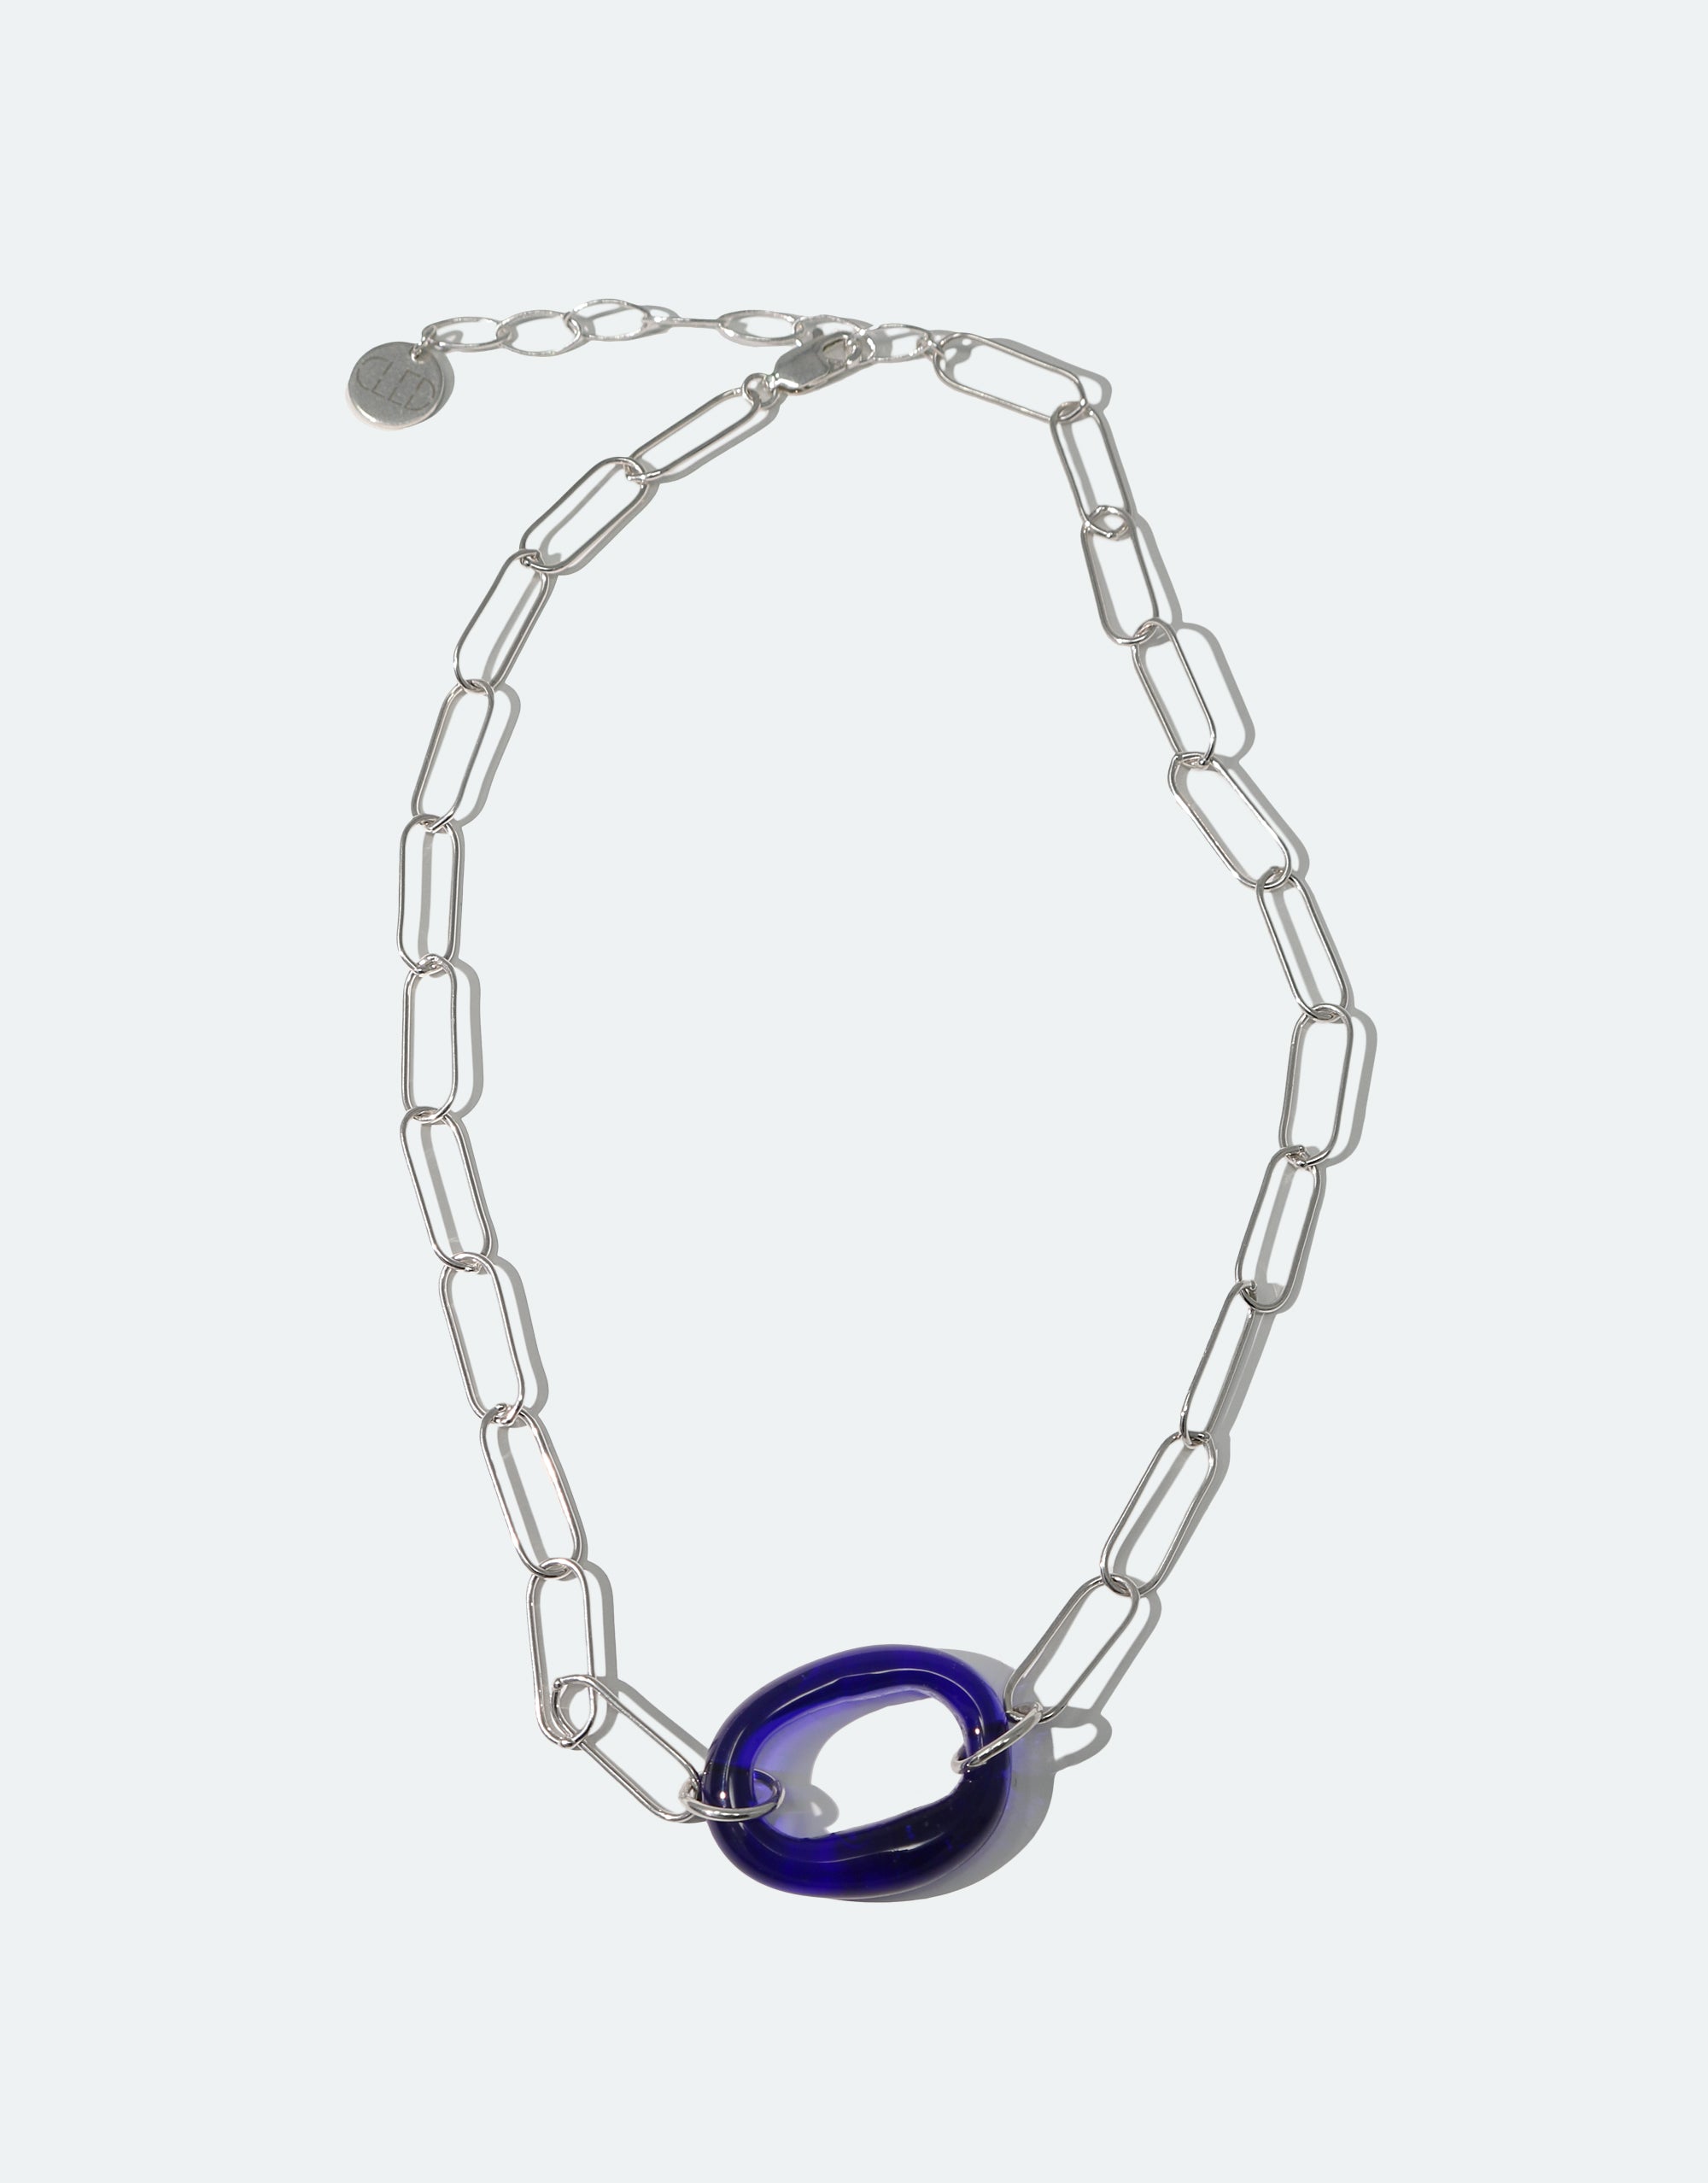 CLED Eco Conscious Sustainable upcycled jewelry made from Eco Gems and sterling silver from recycled glass | The Day Loop Necklace